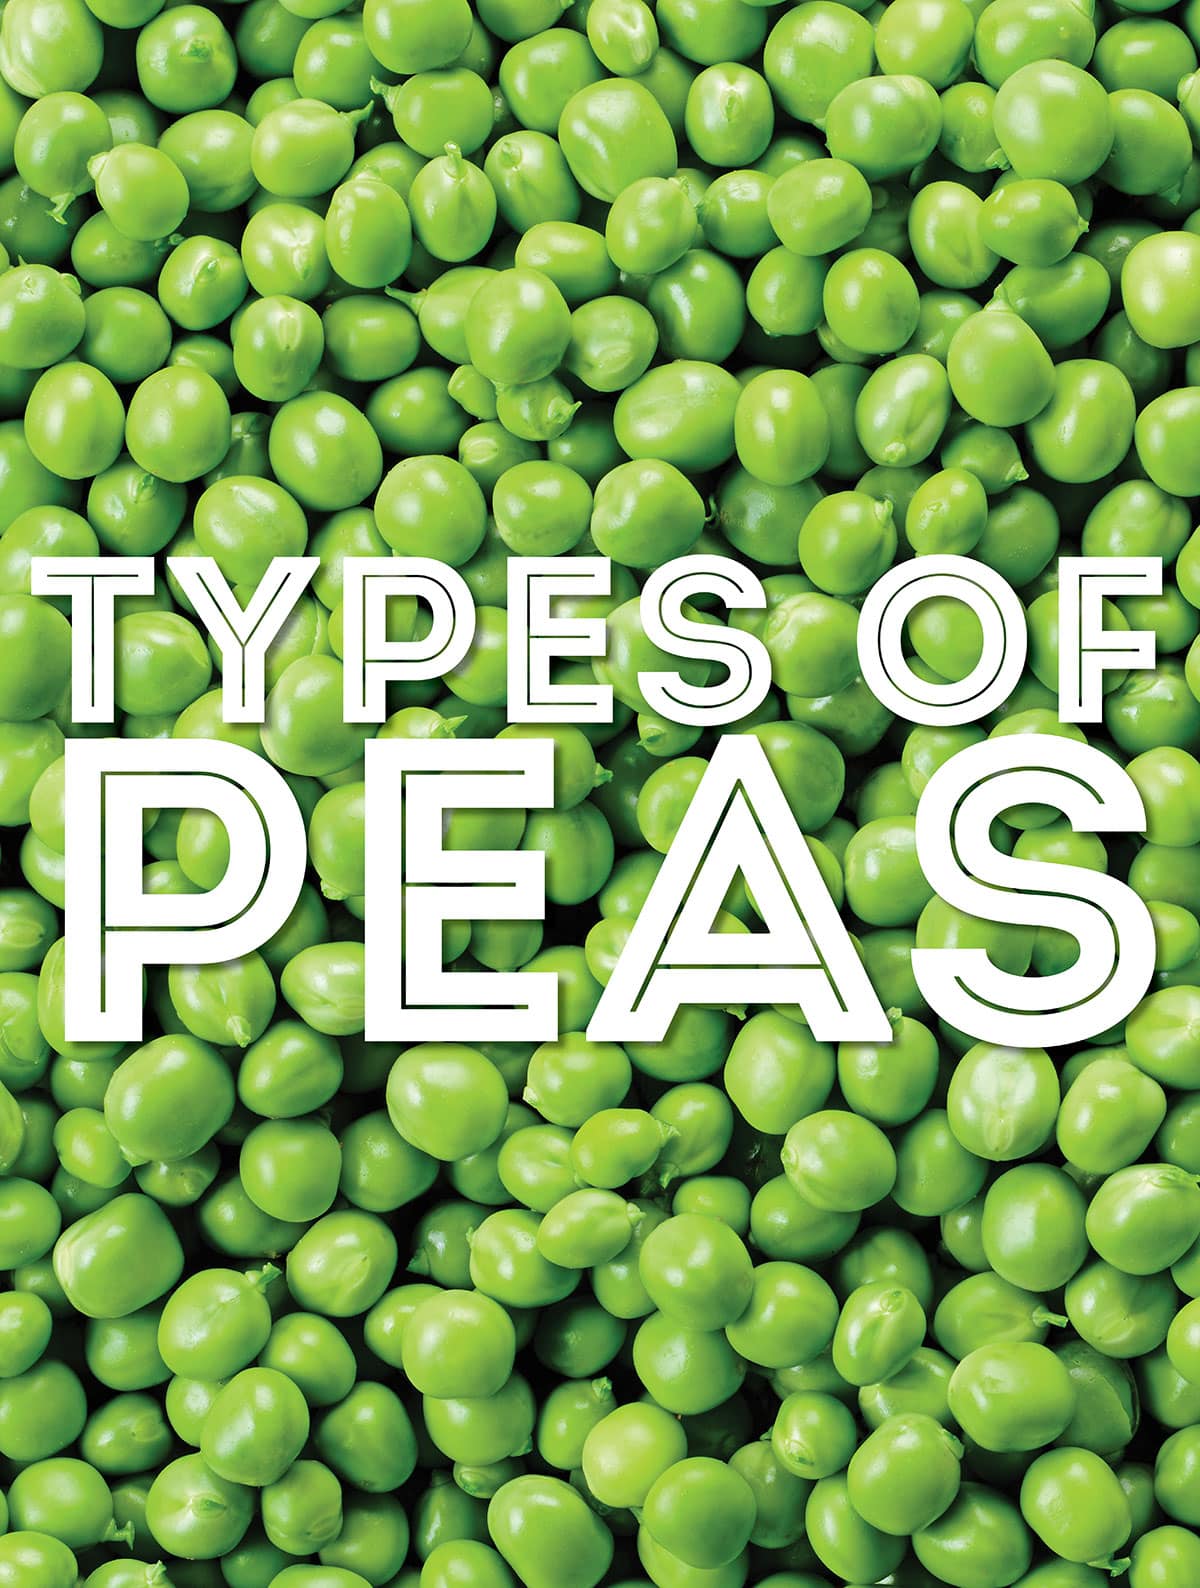 Collage that says "types of peas".